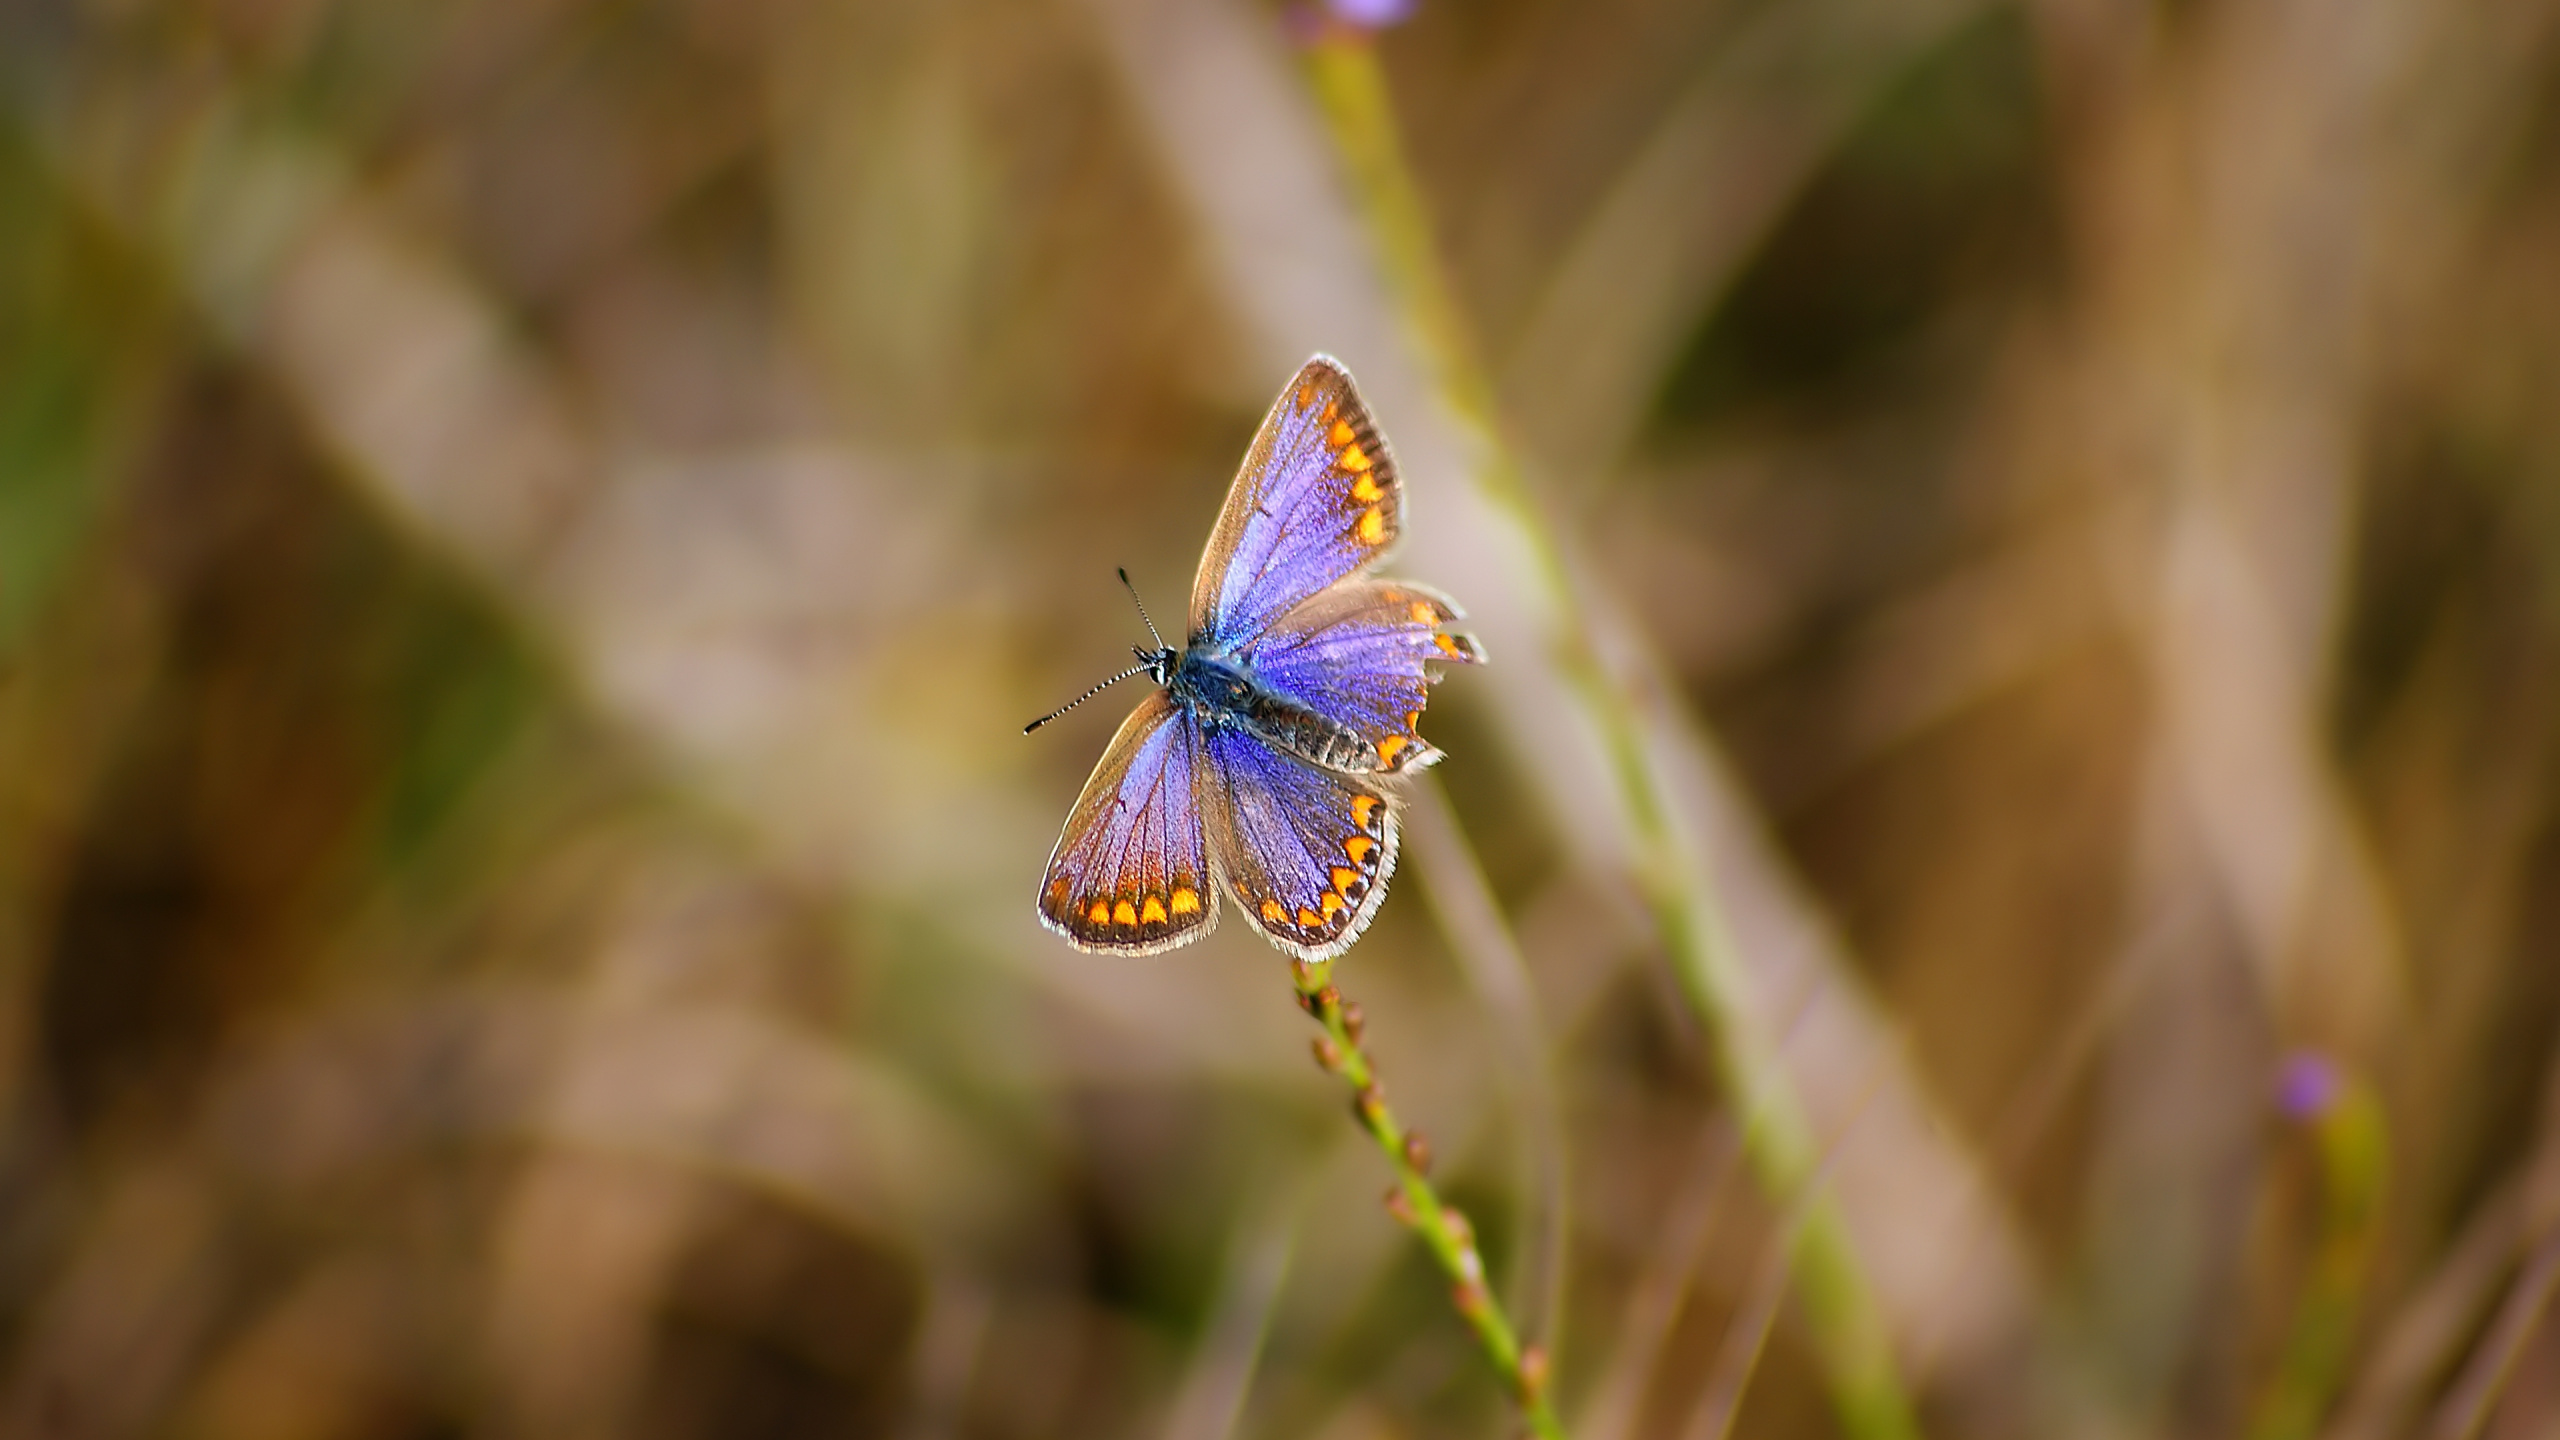 Blue and Brown Butterfly on Green Plant. Wallpaper in 2560x1440 Resolution